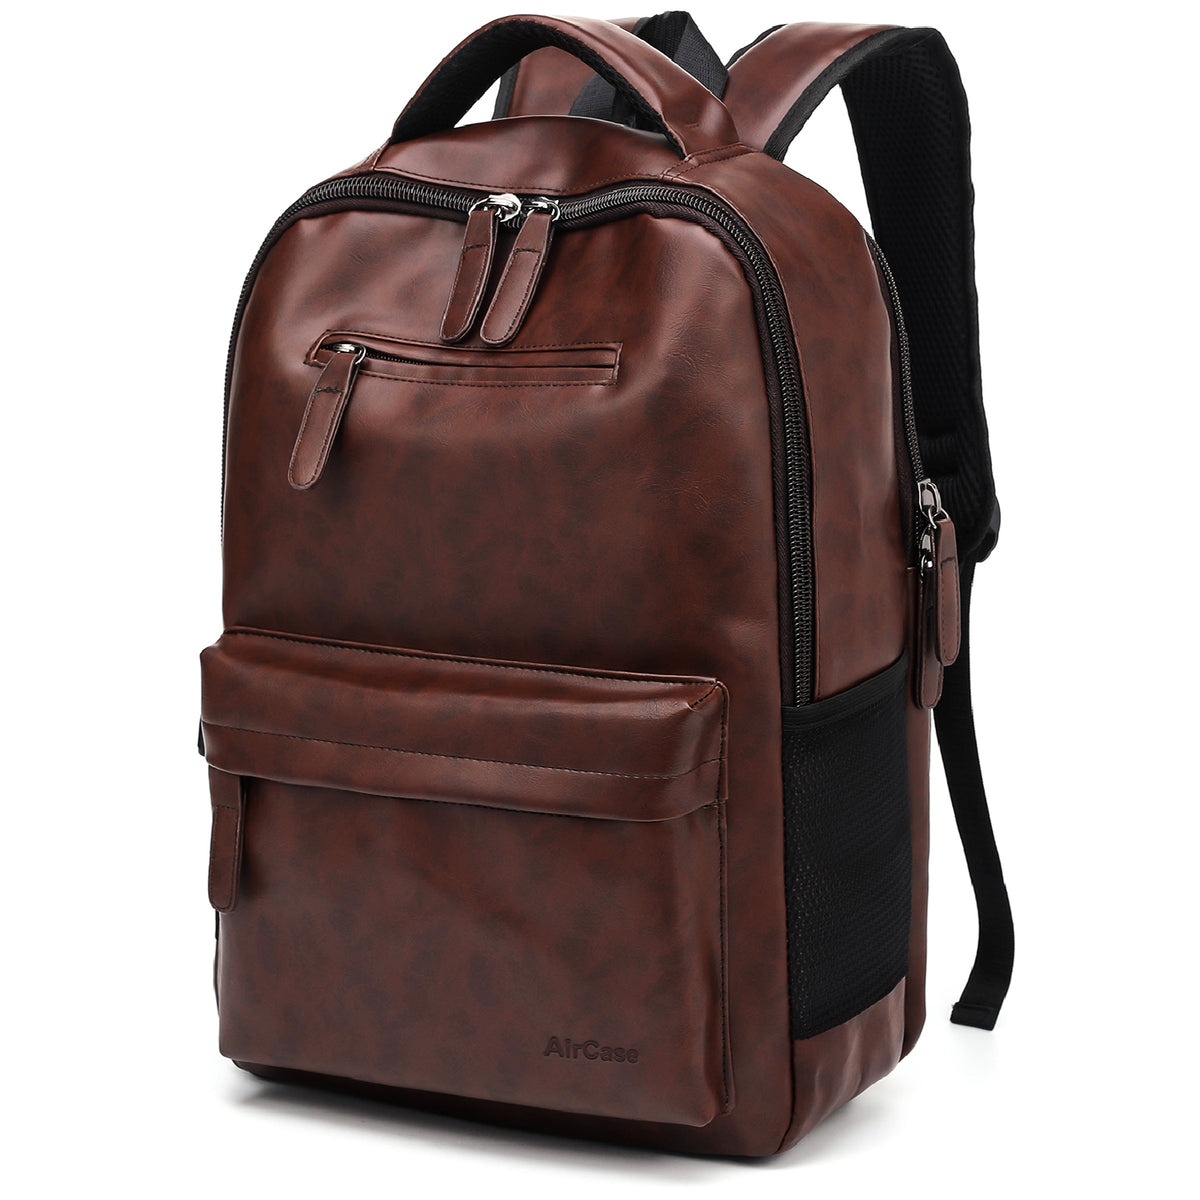 Shop Corporate & Casual Backpacks at Upto 74% OFF on Nasher Miles